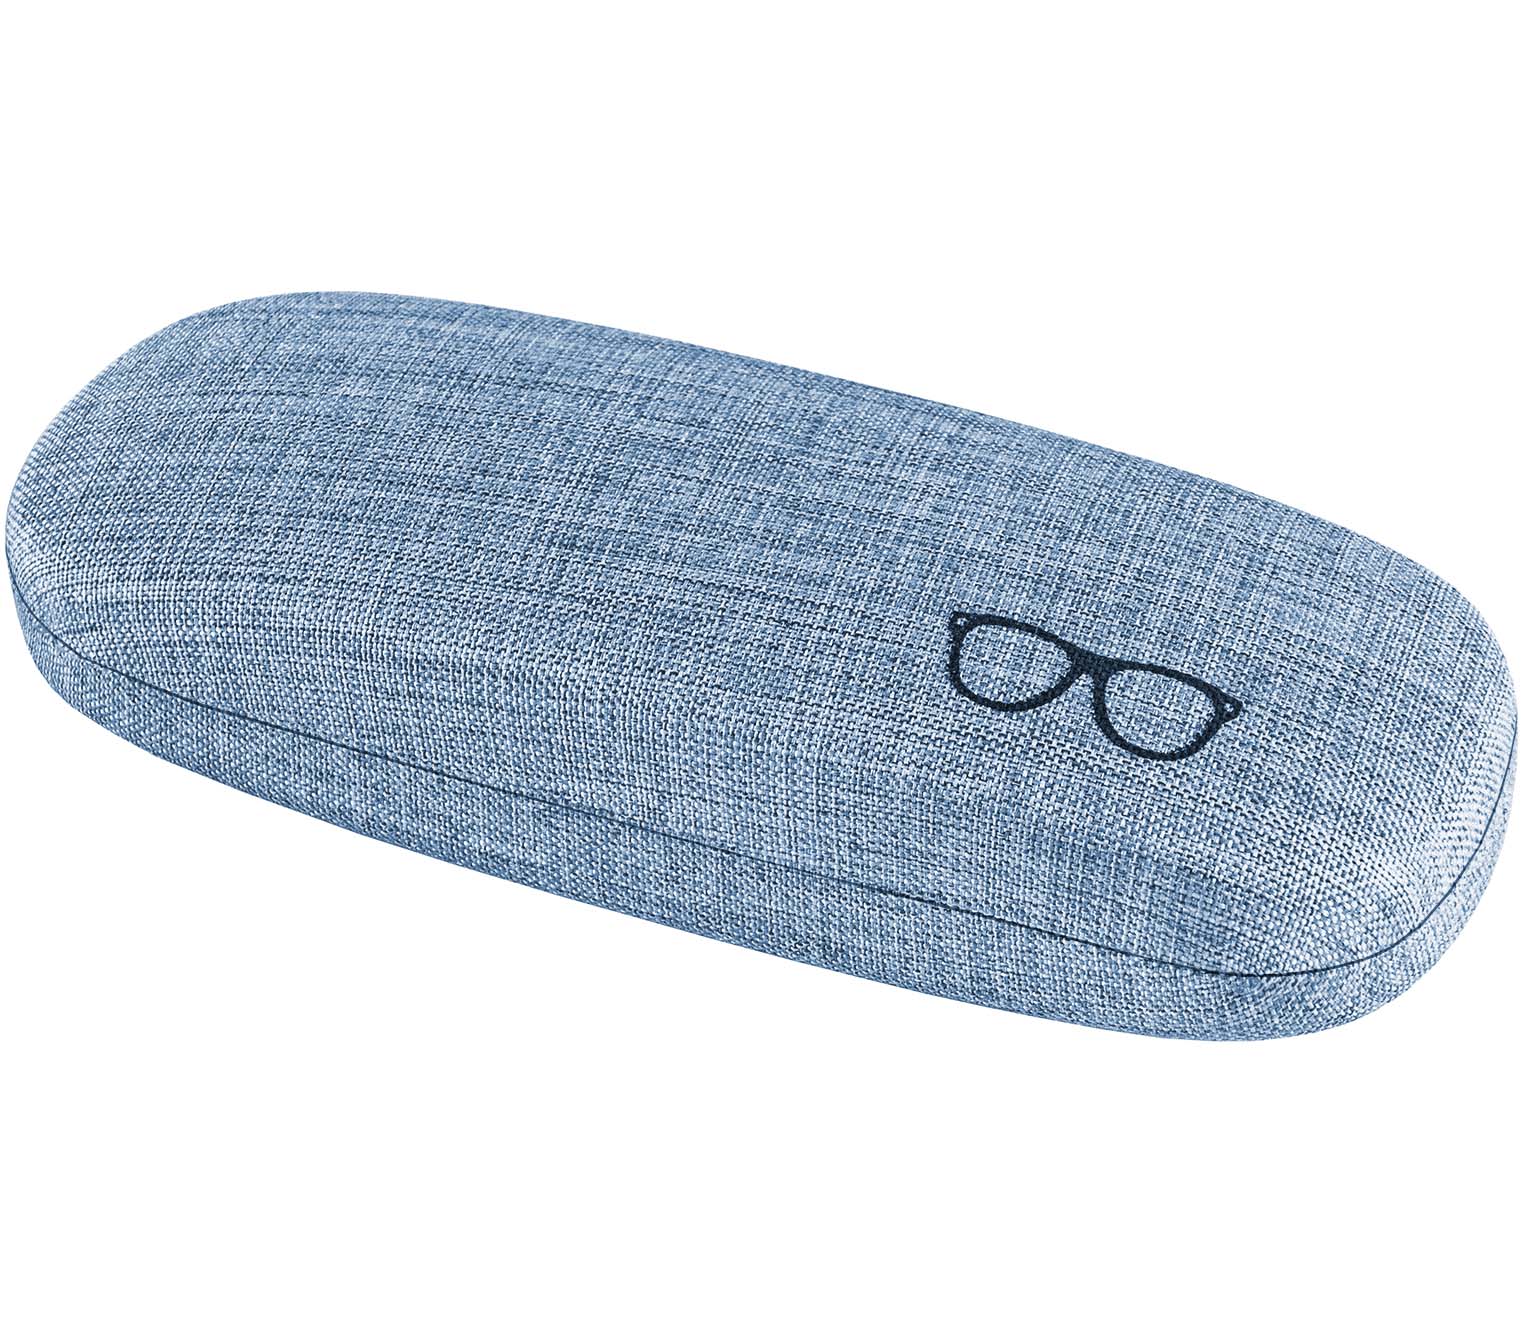 Main Image (Angle) - Archer (Blue) Glasses Cases Accessories